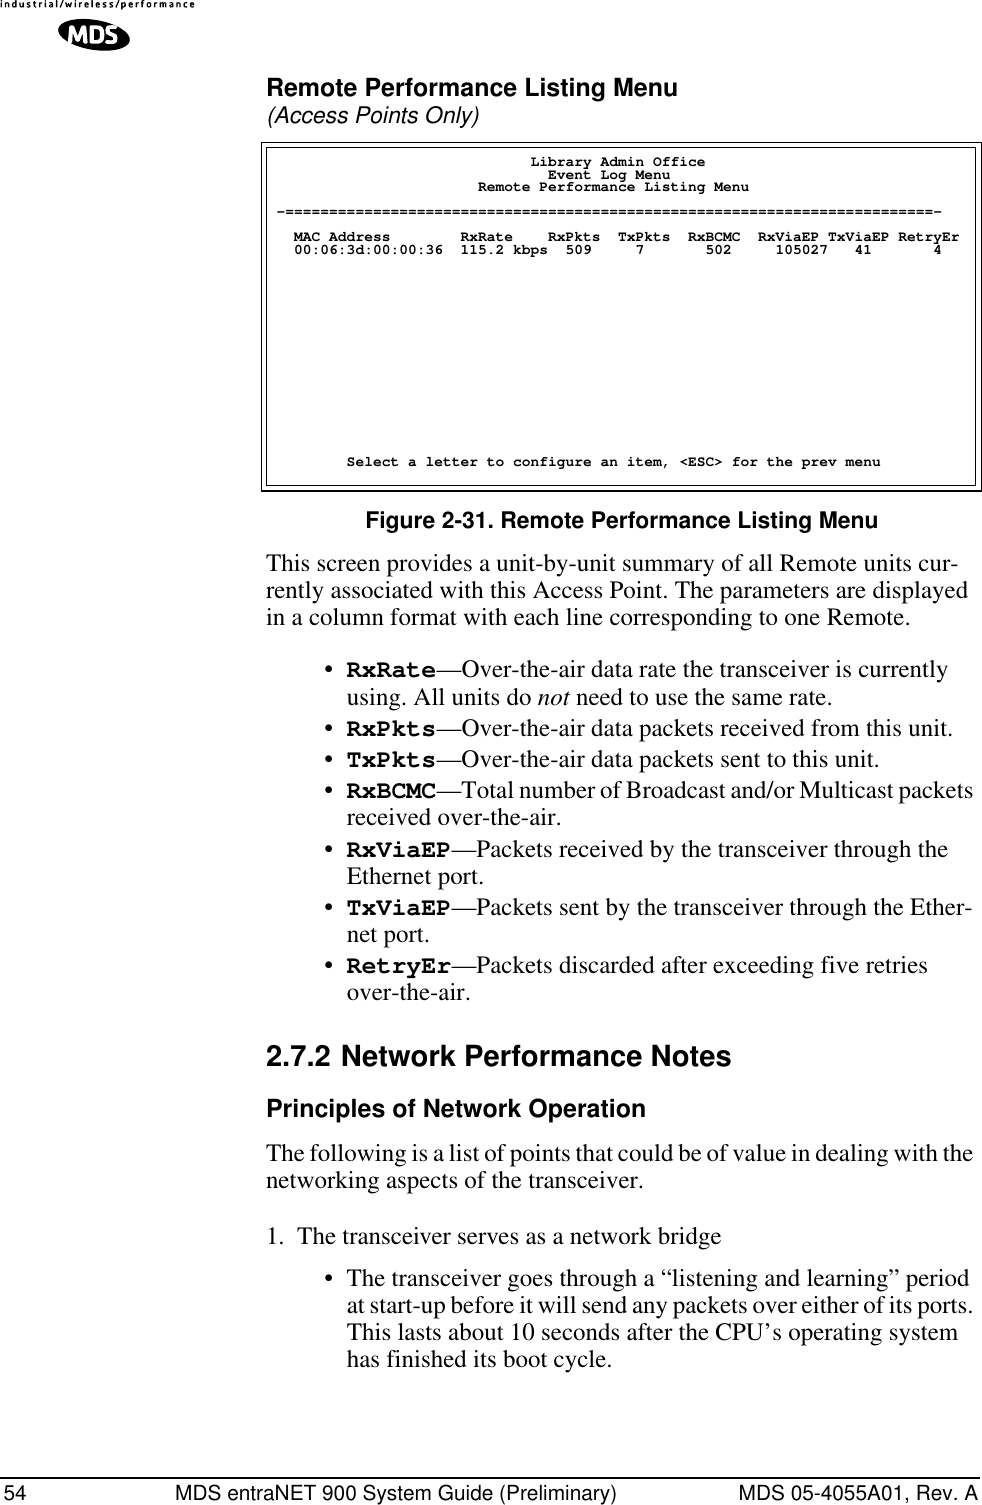 54 MDS entraNET 900 System Guide (Preliminary) MDS 05-4055A01, Rev. ARemote Performance Listing Menu (Access Points Only) Figure 2-31. Remote Performance Listing MenuThis screen provides a unit-by-unit summary of all Remote units cur-rently associated with this Access Point. The parameters are displayed in a column format with each line corresponding to one Remote.•RxRate—Over-the-air data rate the transceiver is currently using. All units do not need to use the same rate.•RxPkts—Over-the-air data packets received from this unit.•TxPkts—Over-the-air data packets sent to this unit.•RxBCMC—Total number of Broadcast and/or Multicast packets received over-the-air.•RxViaEP—Packets received by the transceiver through the Ethernet port.•TxViaEP—Packets sent by the transceiver through the Ether-net port.•RetryEr—Packets discarded after exceeding five retries over-the-air.2.7.2 Network Performance NotesPrinciples of Network OperationThe following is a list of points that could be of value in dealing with the networking aspects of the transceiver.1. The transceiver serves as a network bridge• The transceiver goes through a “listening and learning” period at start-up before it will send any packets over either of its ports. This lasts about 10 seconds after the CPU’s operating system has finished its boot cycle.                             Library Admin Office                               Event Log Menu                       Remote Performance Listing Menu -==========================================================================-  MAC Address        RxRate    RxPkts  TxPkts  RxBCMC  RxViaEP TxViaEP RetryEr  00:06:3d:00:00:36  115.2 kbps  509     7       502     105027   41       4        Select a letter to configure an item, &lt;ESC&gt; for the prev menu